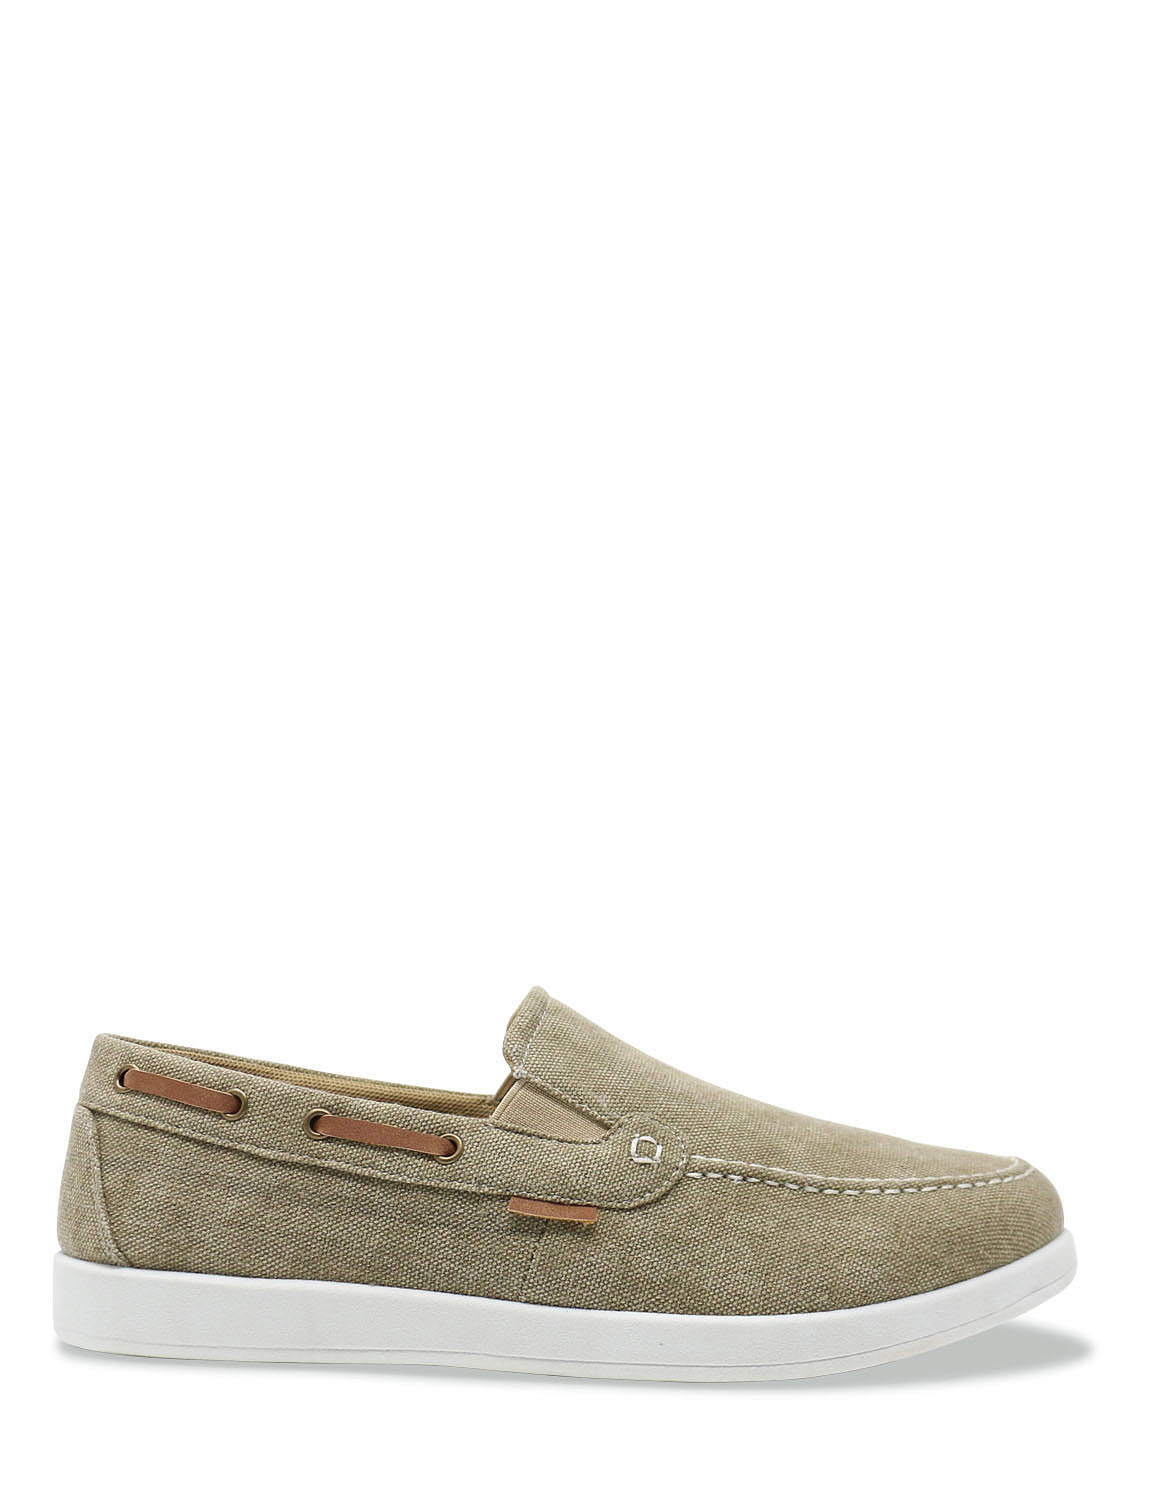 Buy > dr keller wide fit canvas shoes > in stock